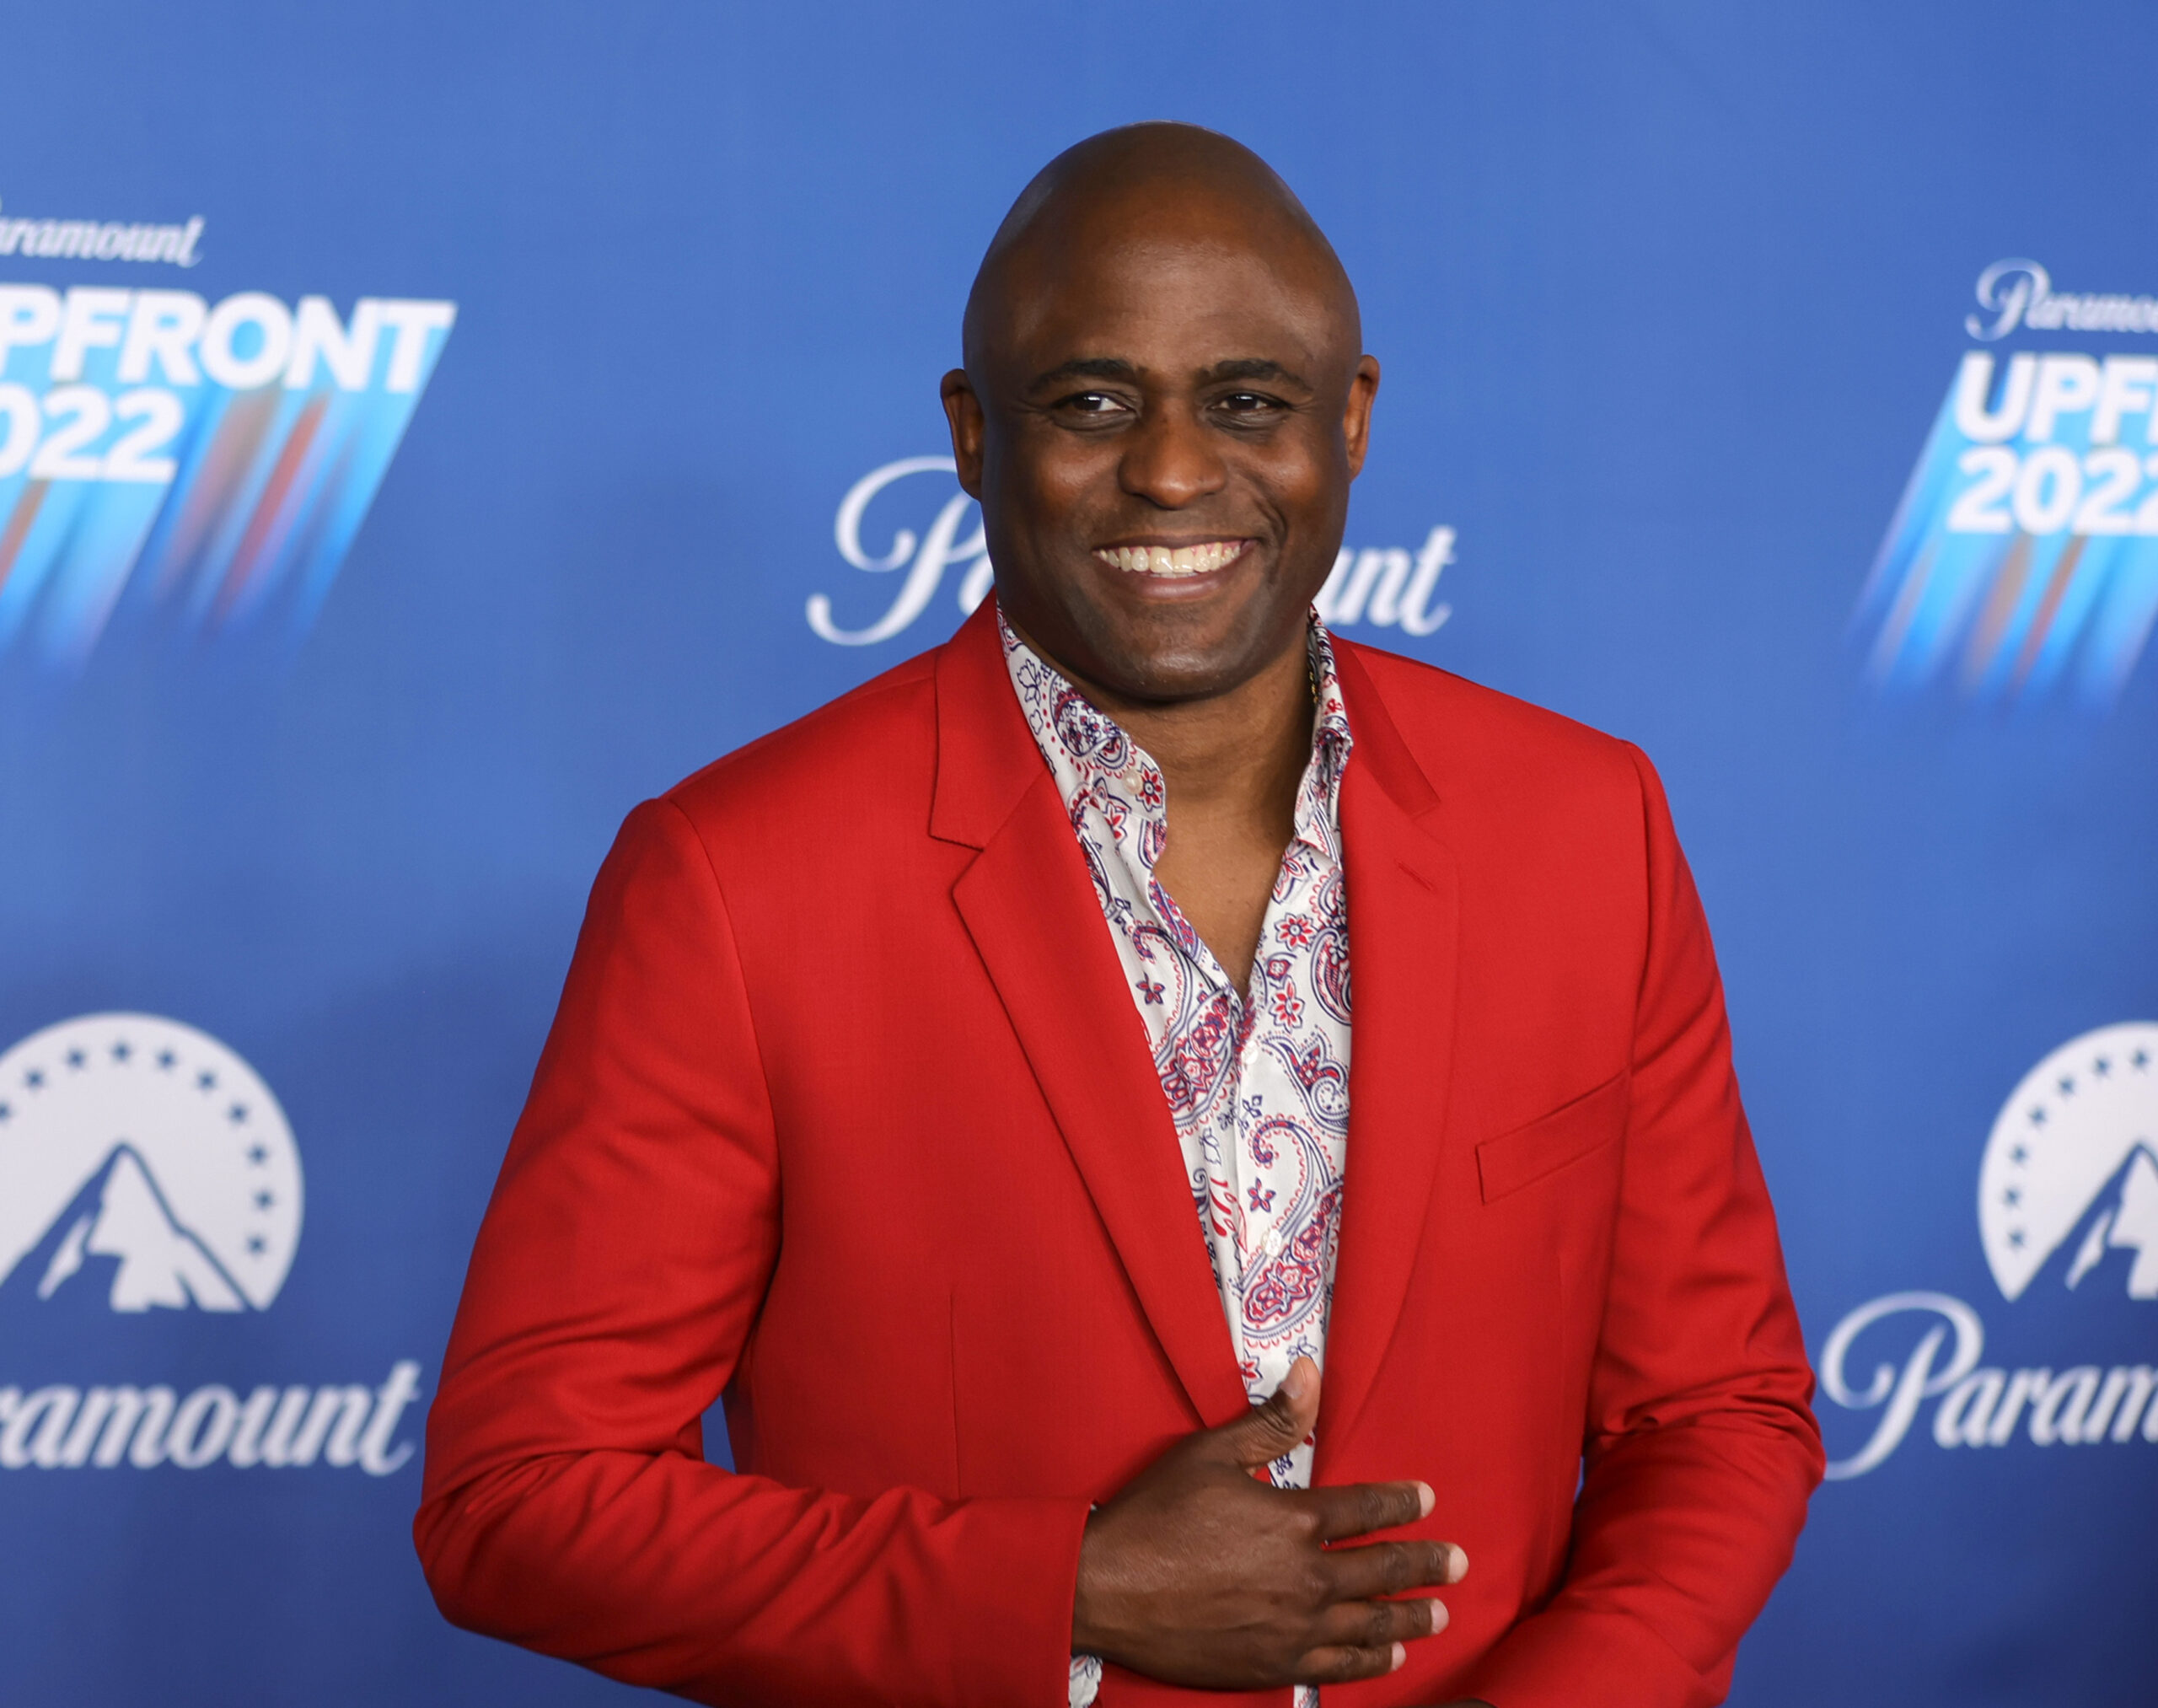 ‘Let’s Make A Deal’ host Wayne Brady comes out as ‘pansexual’.